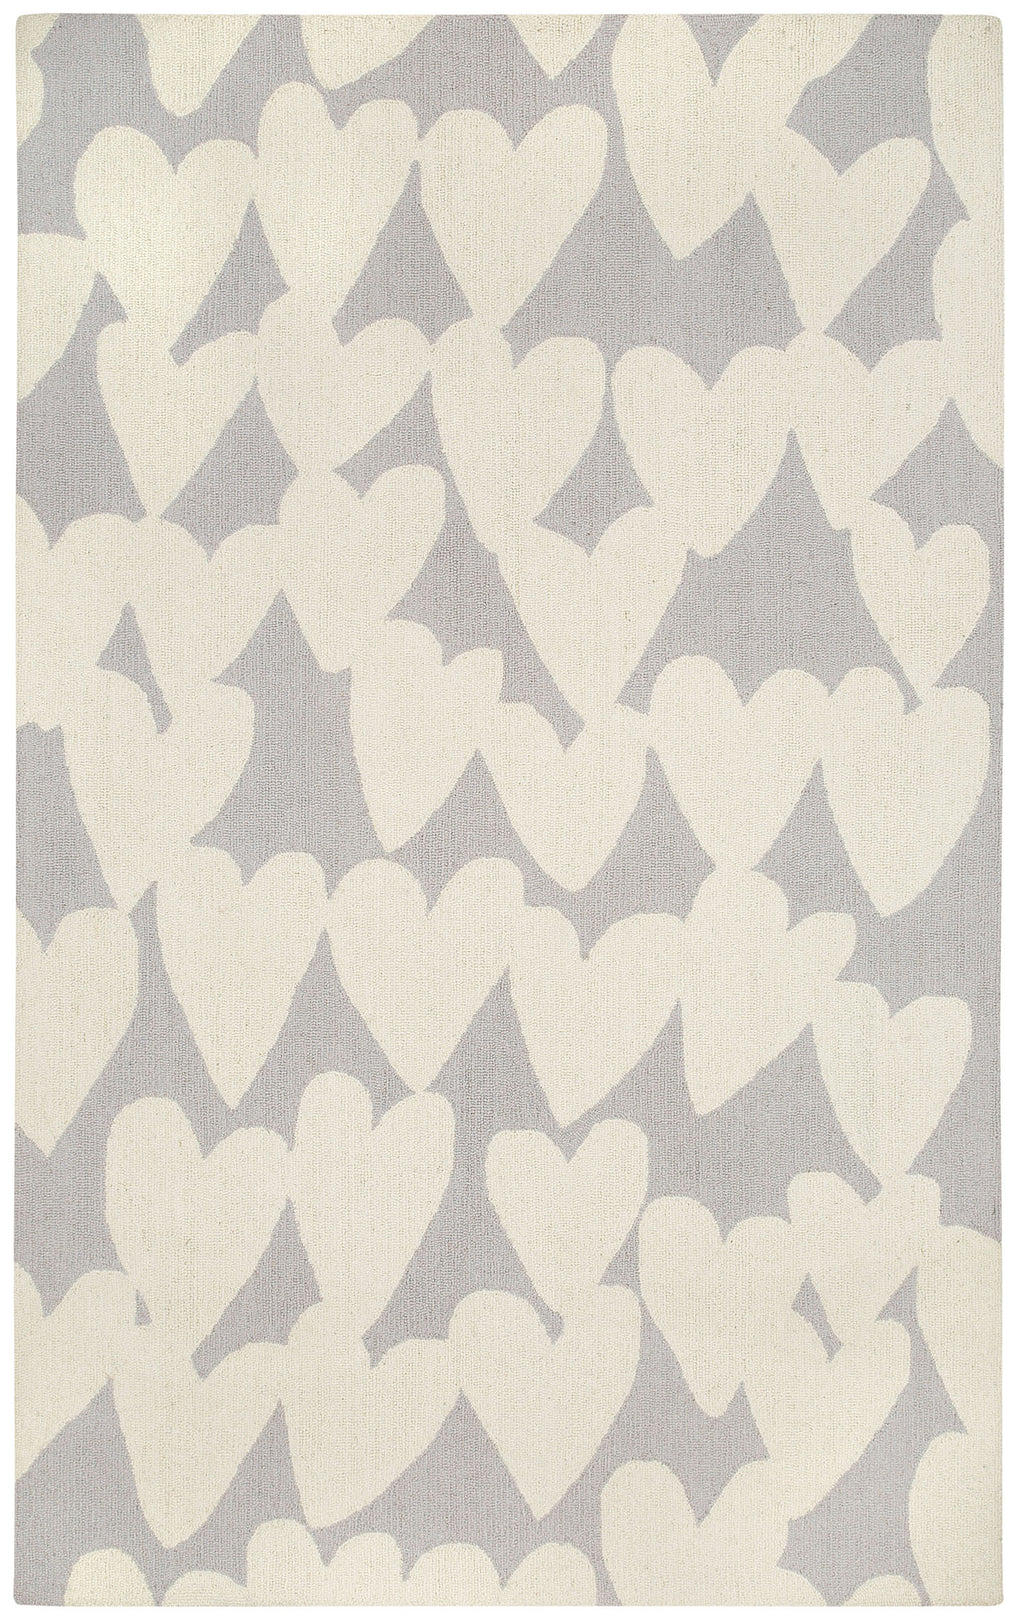 Capel Valentine 6063 Silver 300 Area Rug by Hable Construction main image